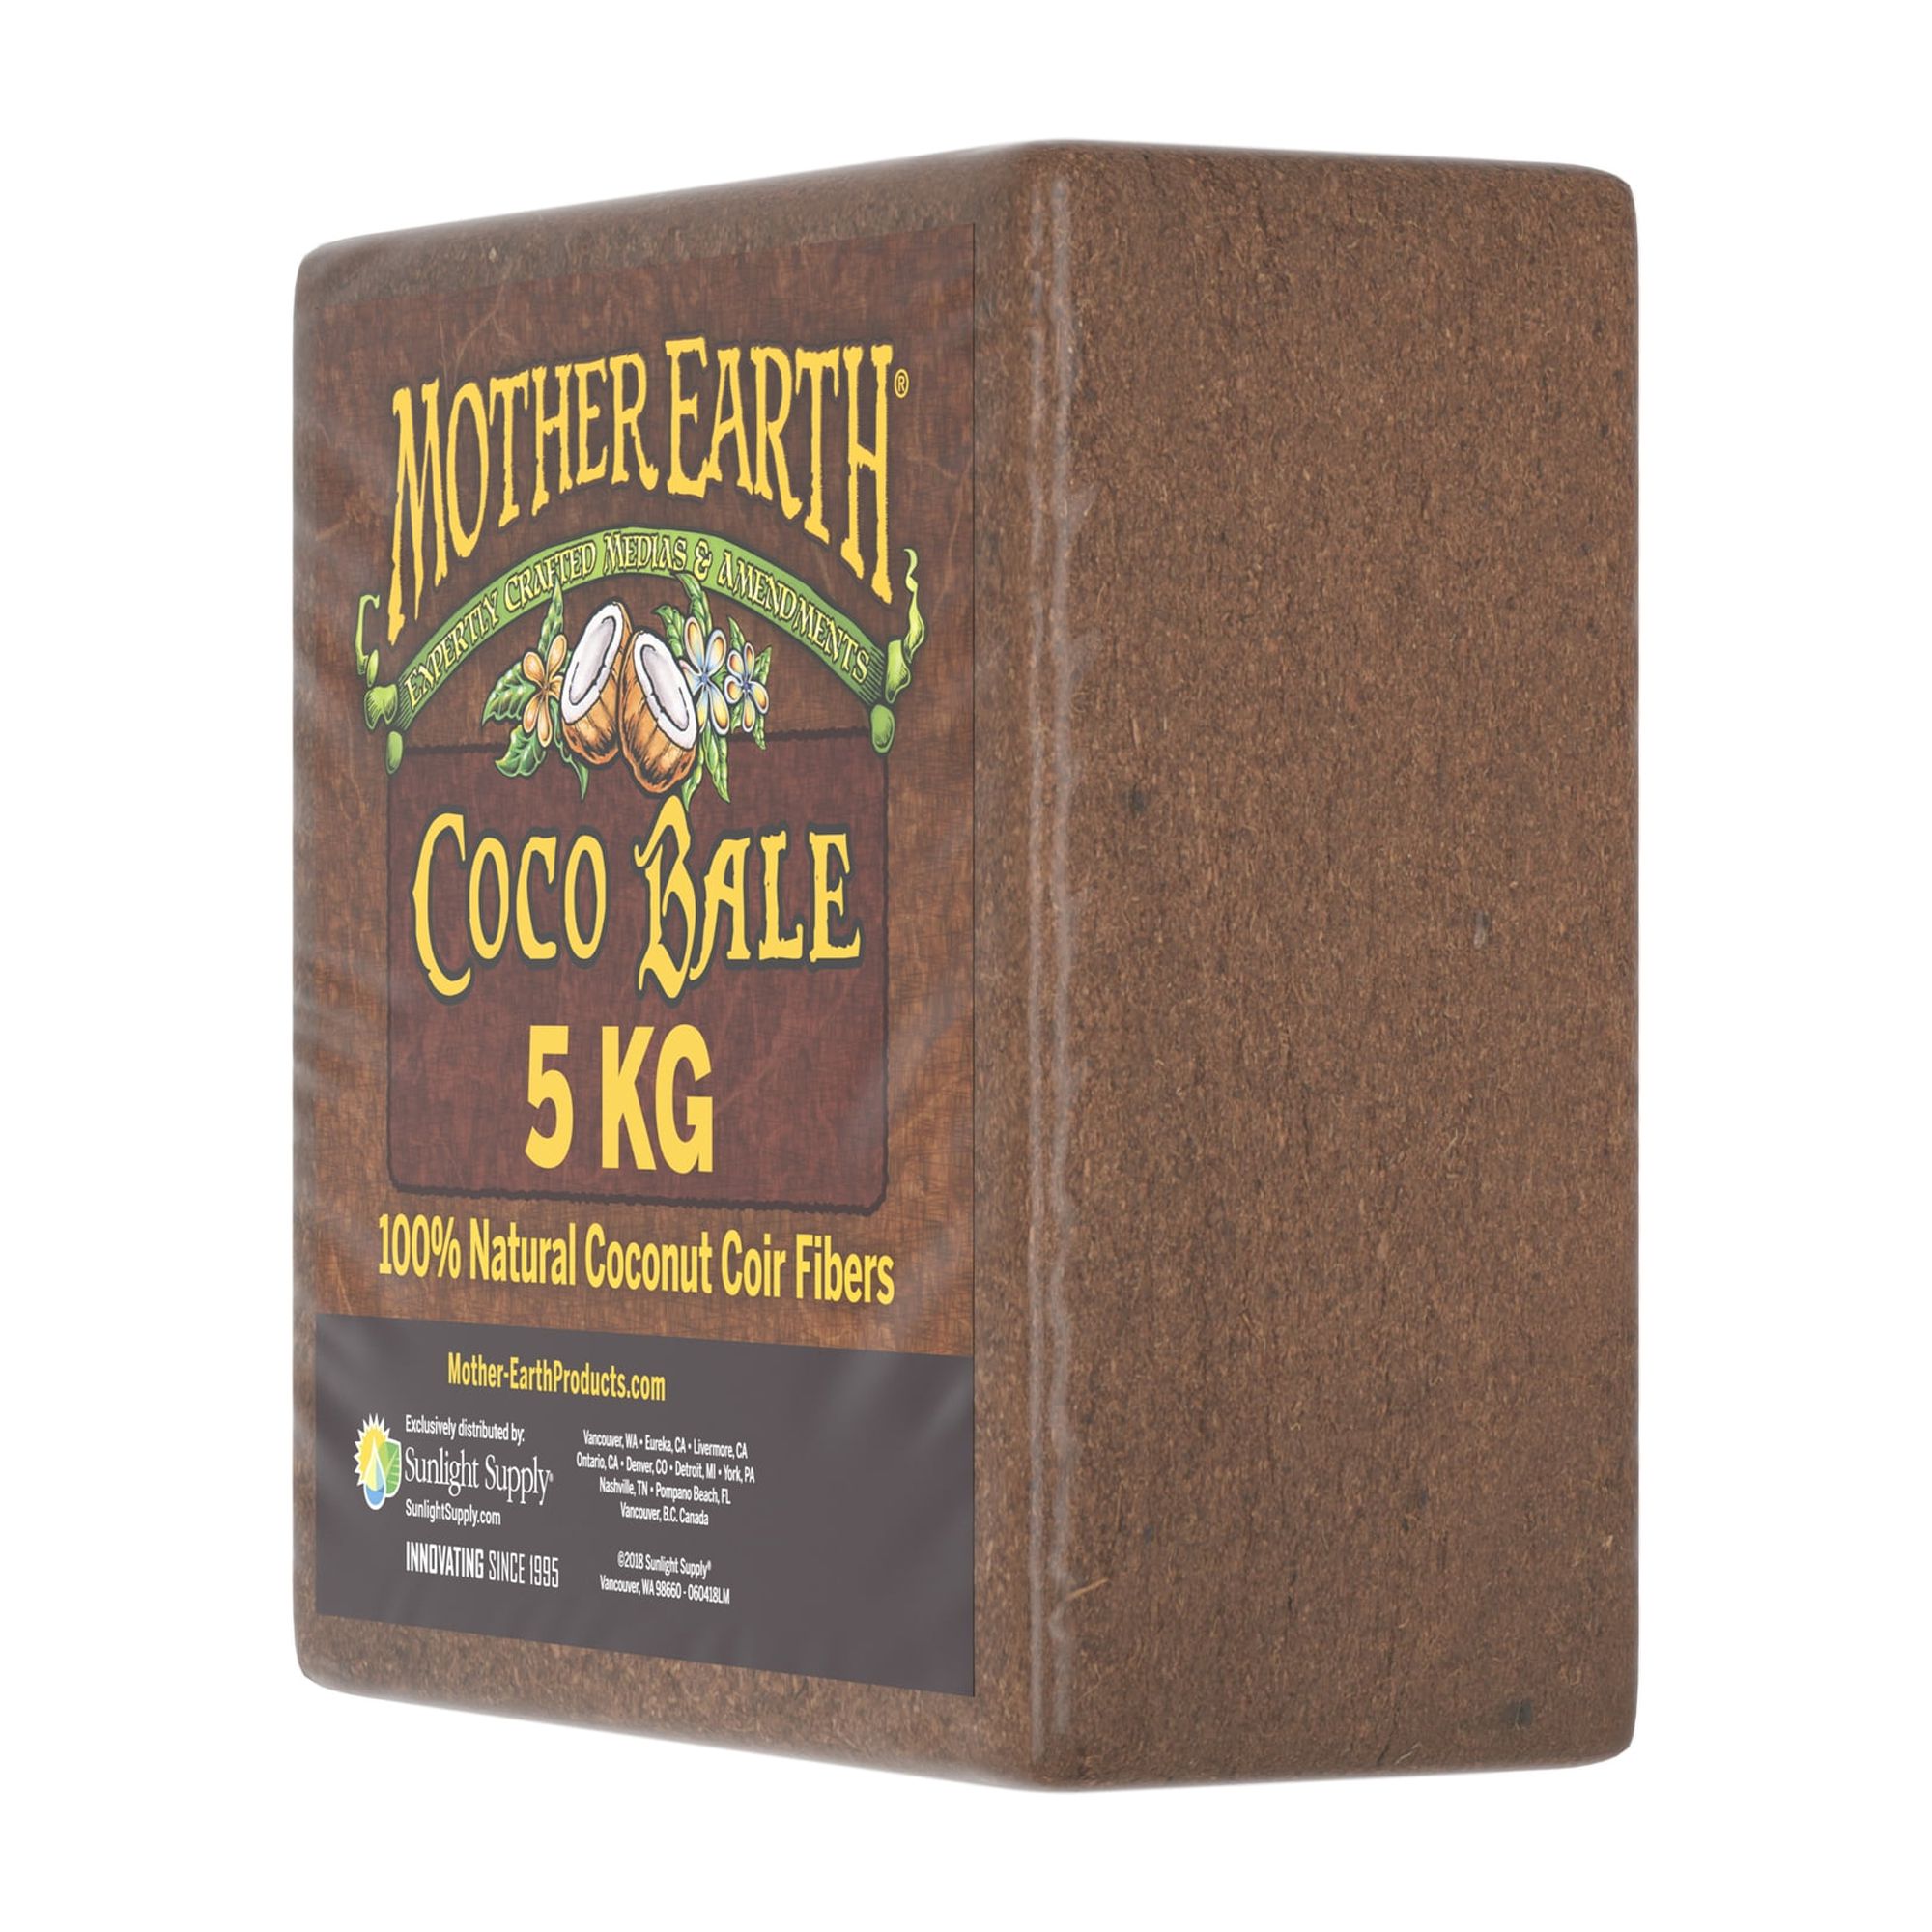 Mother Earth Coco Bale 5 kg, 100% Coconut Coir Fibers - image 4 of 8